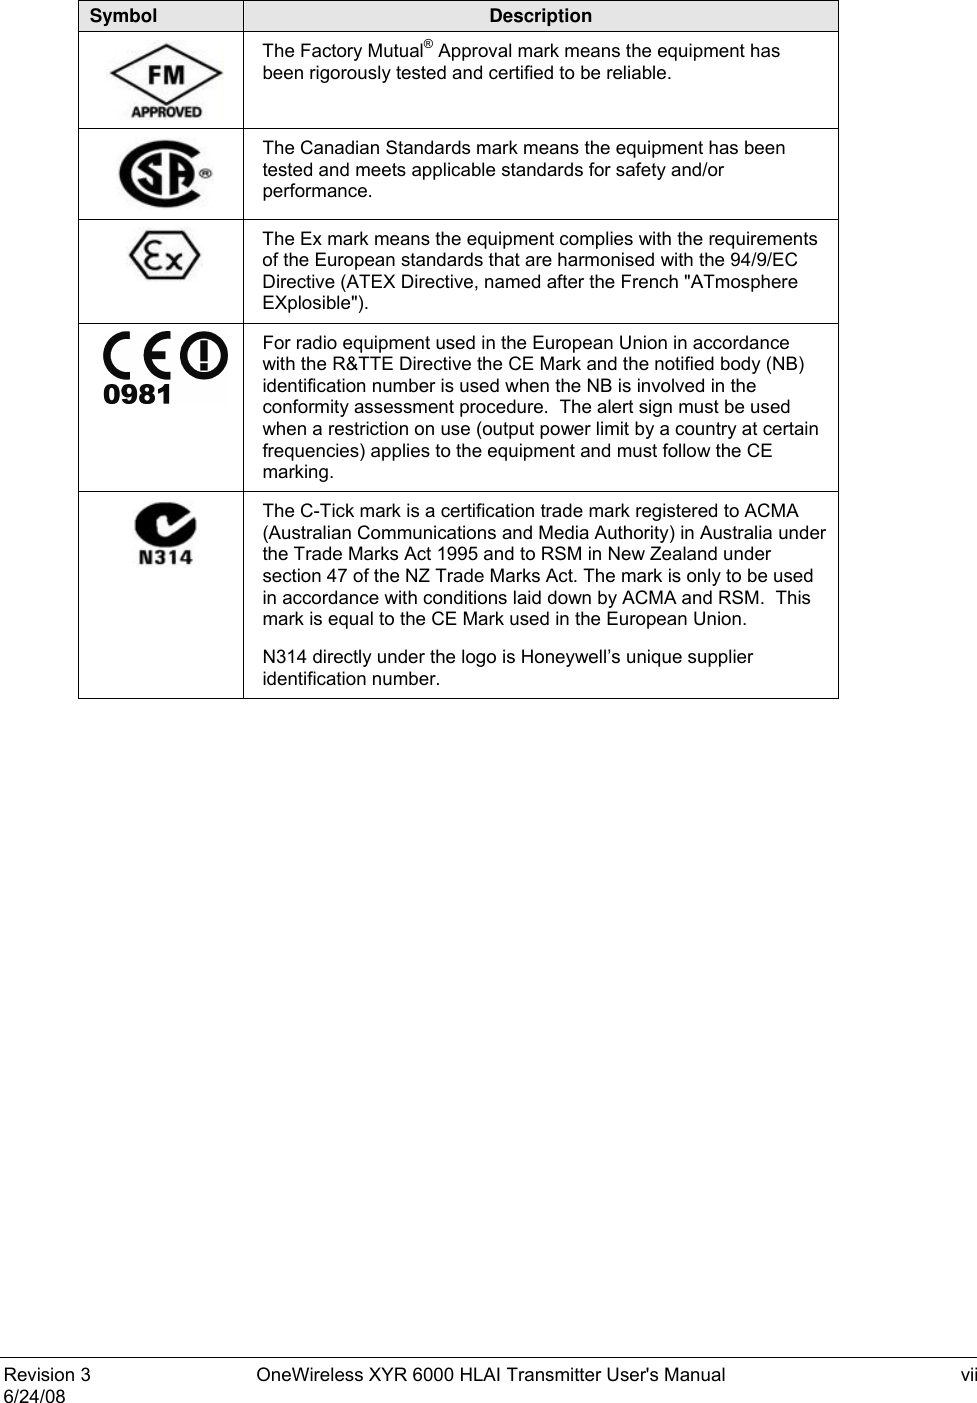  Revision 3  OneWireless XYR 6000 HLAI Transmitter User&apos;s Manual  vii 6/24/08  Symbol  Description  The Factory Mutual® Approval mark means the equipment has been rigorously tested and certified to be reliable.   The Canadian Standards mark means the equipment has been tested and meets applicable standards for safety and/or performance.  The Ex mark means the equipment complies with the requirements of the European standards that are harmonised with the 94/9/EC Directive (ATEX Directive, named after the French &quot;ATmosphere EXplosible&quot;).  For radio equipment used in the European Union in accordance with the R&amp;TTE Directive the CE Mark and the notified body (NB) identification number is used when the NB is involved in the conformity assessment procedure.  The alert sign must be used when a restriction on use (output power limit by a country at certain frequencies) applies to the equipment and must follow the CE marking.  The C-Tick mark is a certification trade mark registered to ACMA (Australian Communications and Media Authority) in Australia under the Trade Marks Act 1995 and to RSM in New Zealand under section 47 of the NZ Trade Marks Act. The mark is only to be used in accordance with conditions laid down by ACMA and RSM.  This mark is equal to the CE Mark used in the European Union.  N314 directly under the logo is Honeywell’s unique supplier identification number.  